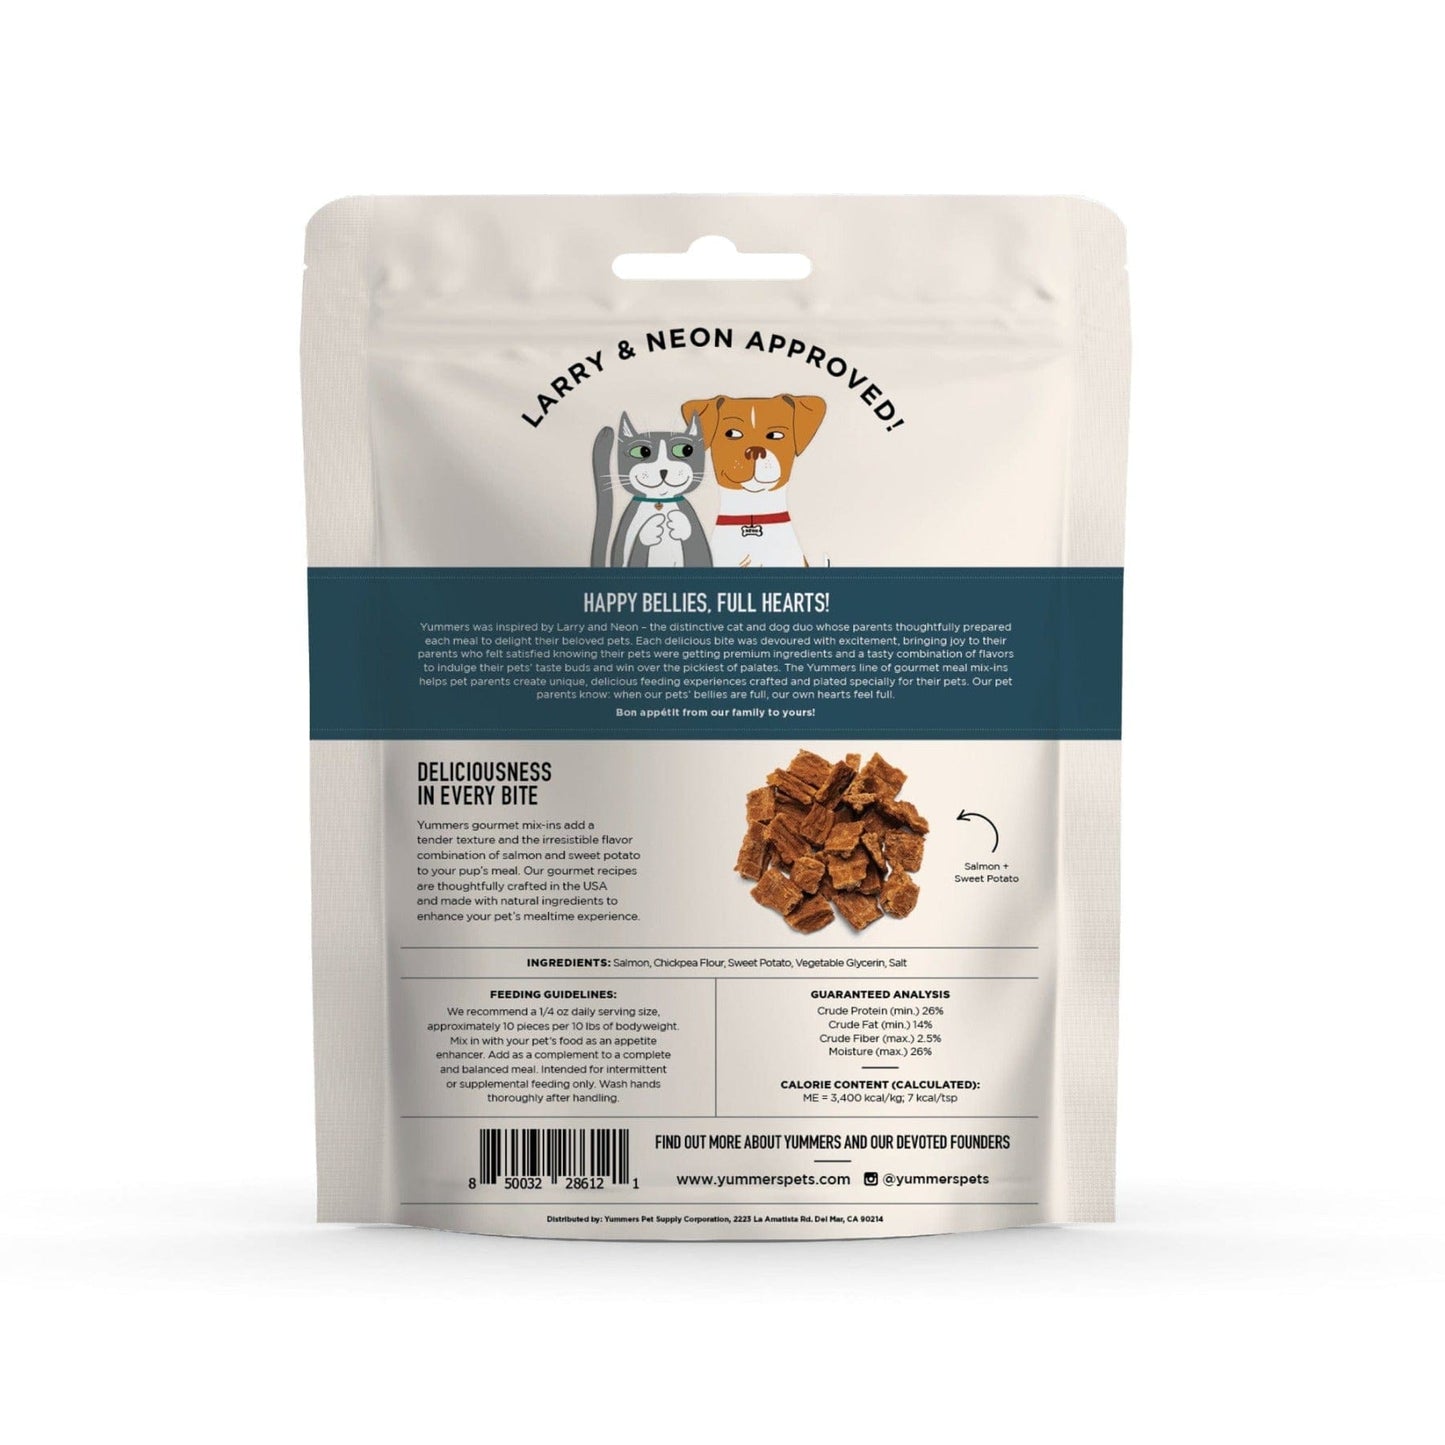 Yummers Salmon & Sweet Potato Recipe Gourmet Meal Mix-in for Dogs, 5 oz. - back of bag